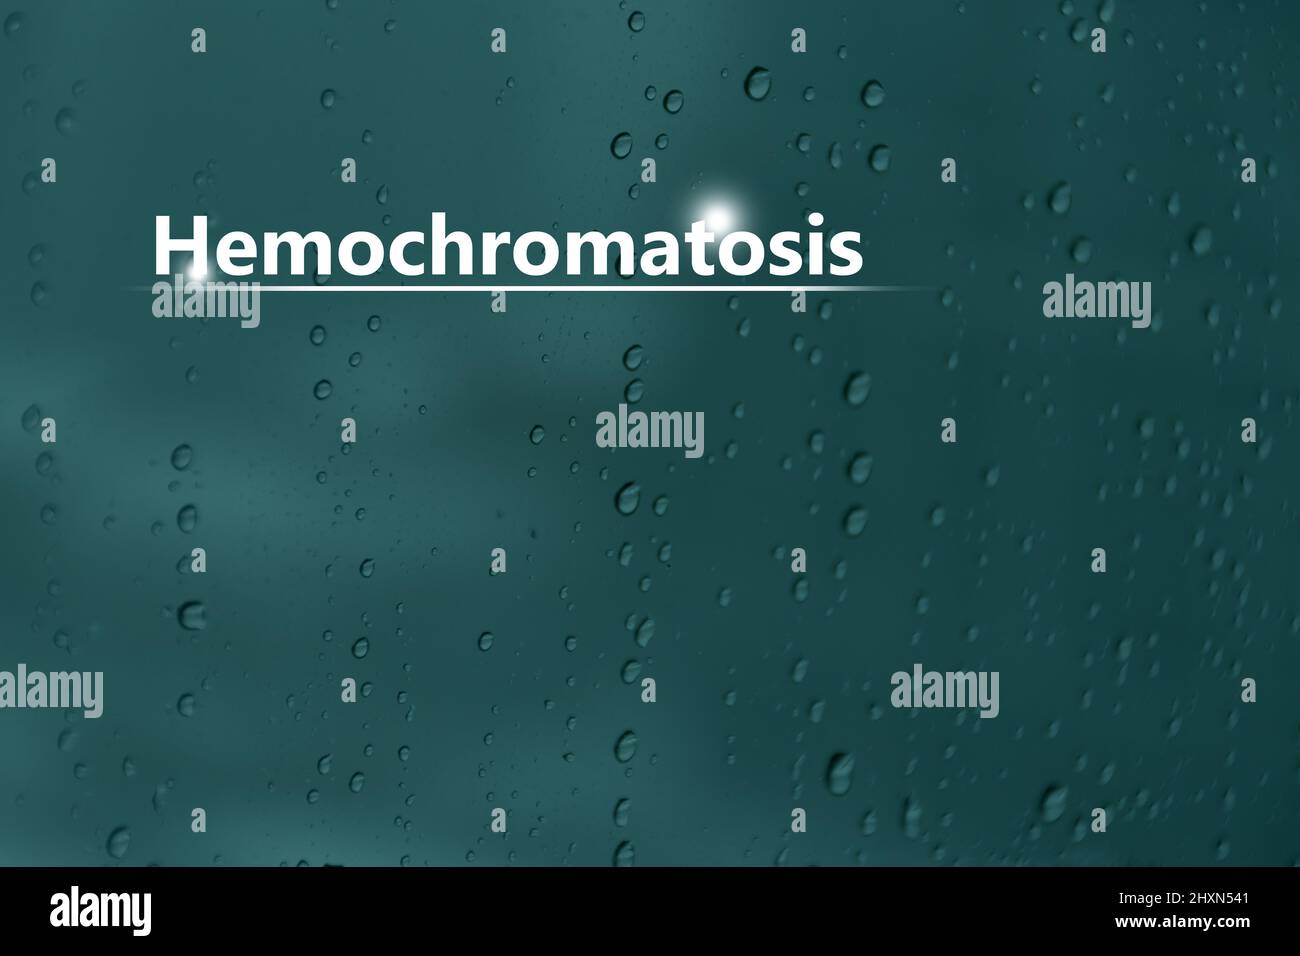 Medical banner 'Hemochromatosis' on blue background with drops and large copy space for text or checklist. Stock Photo